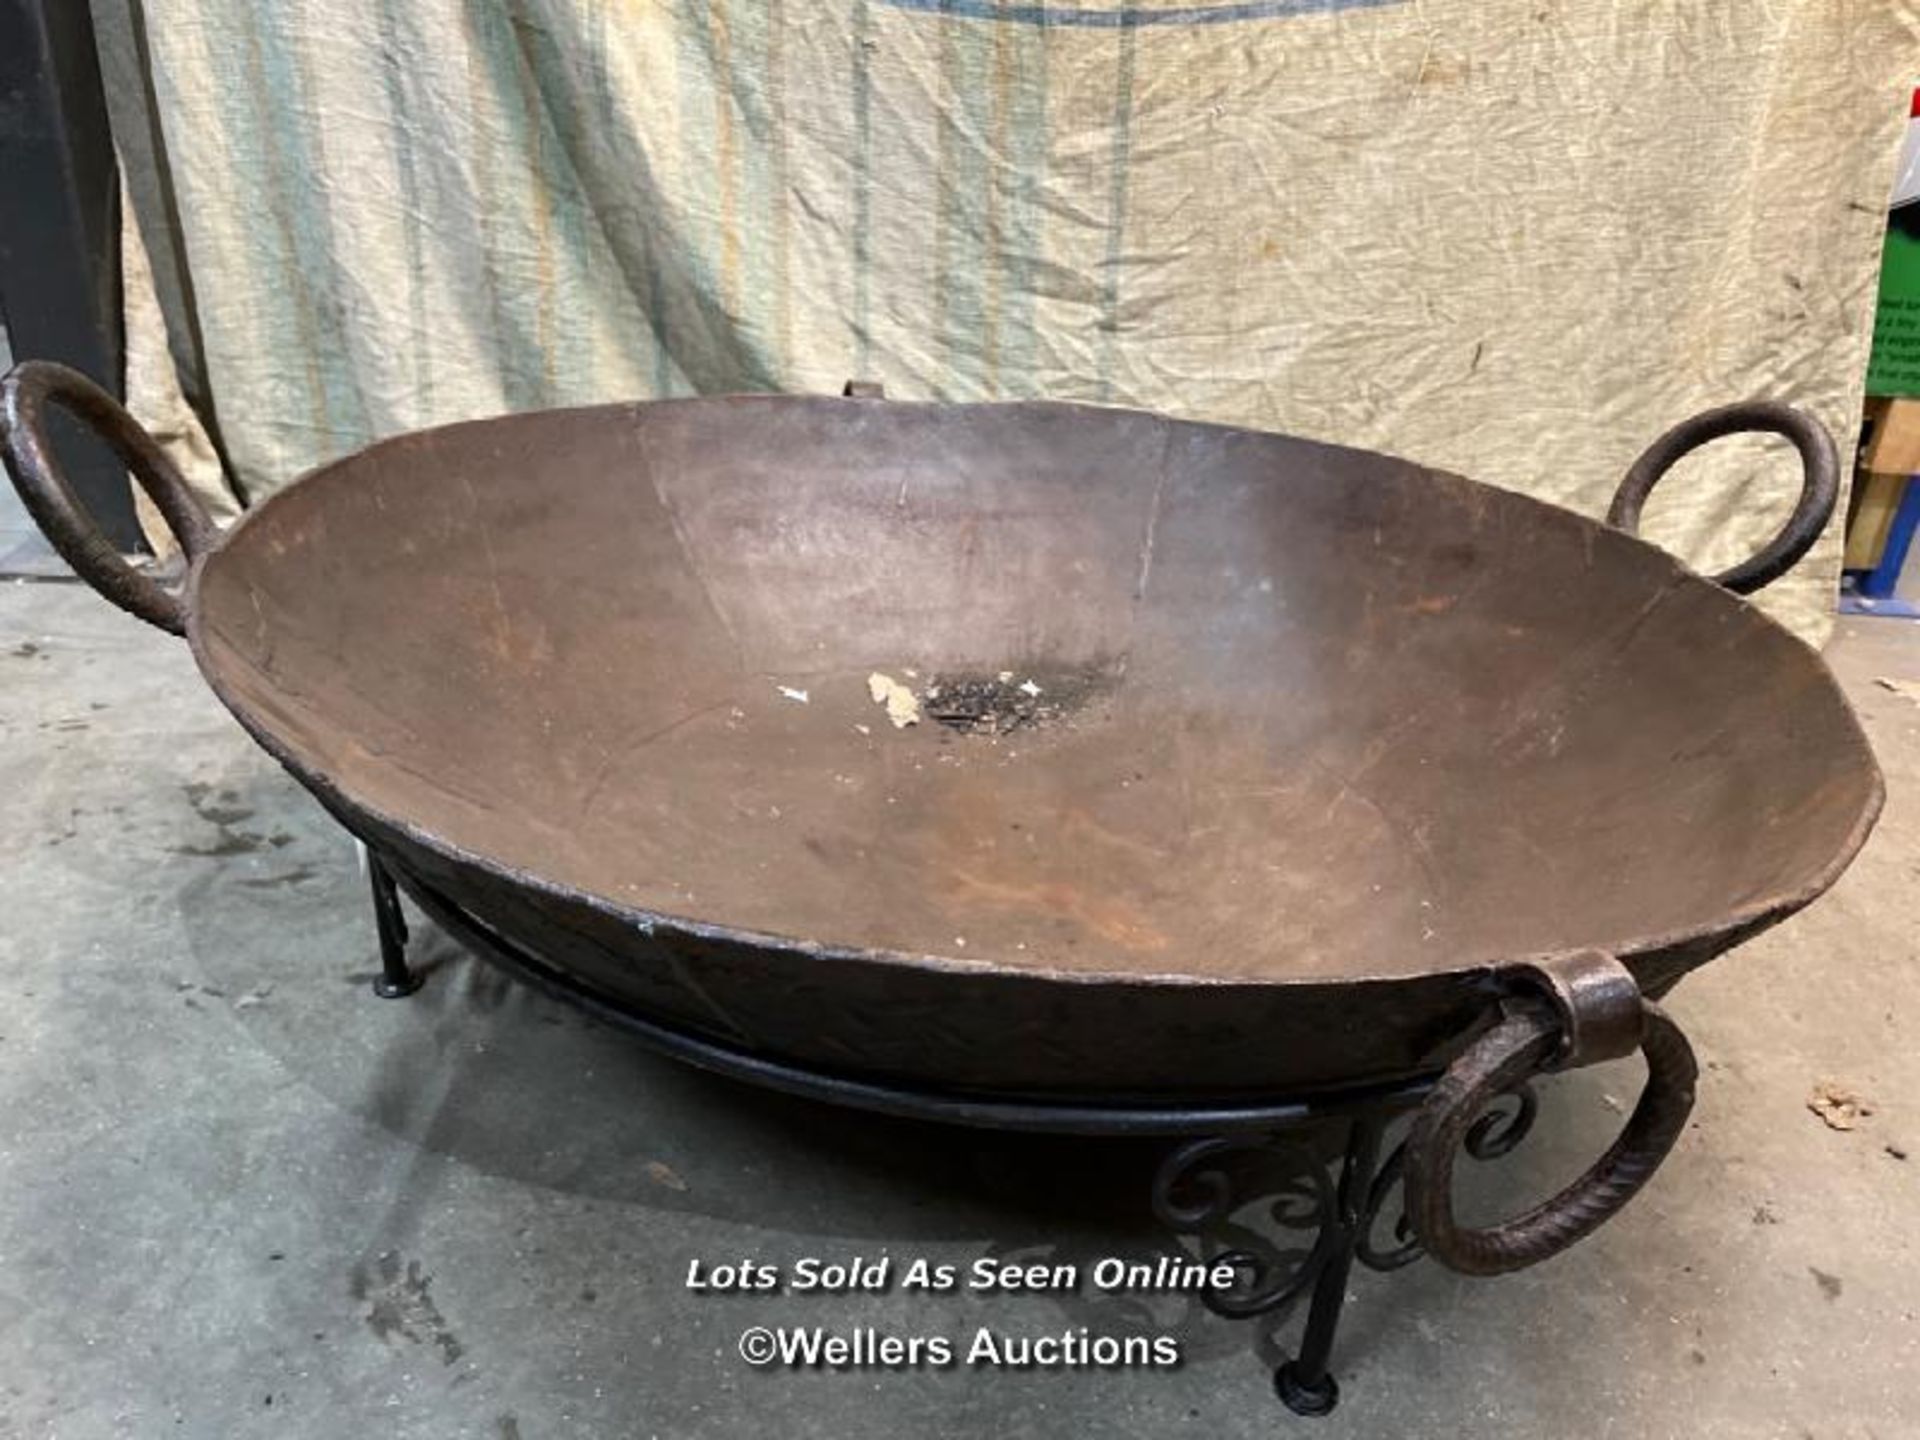 *HUGE KADAI WITH STAND - 100CM DIA X 30CM H / ITEM LOCATION: GUILDFORD, GU14SJ (WELLERS AUCTIONS),